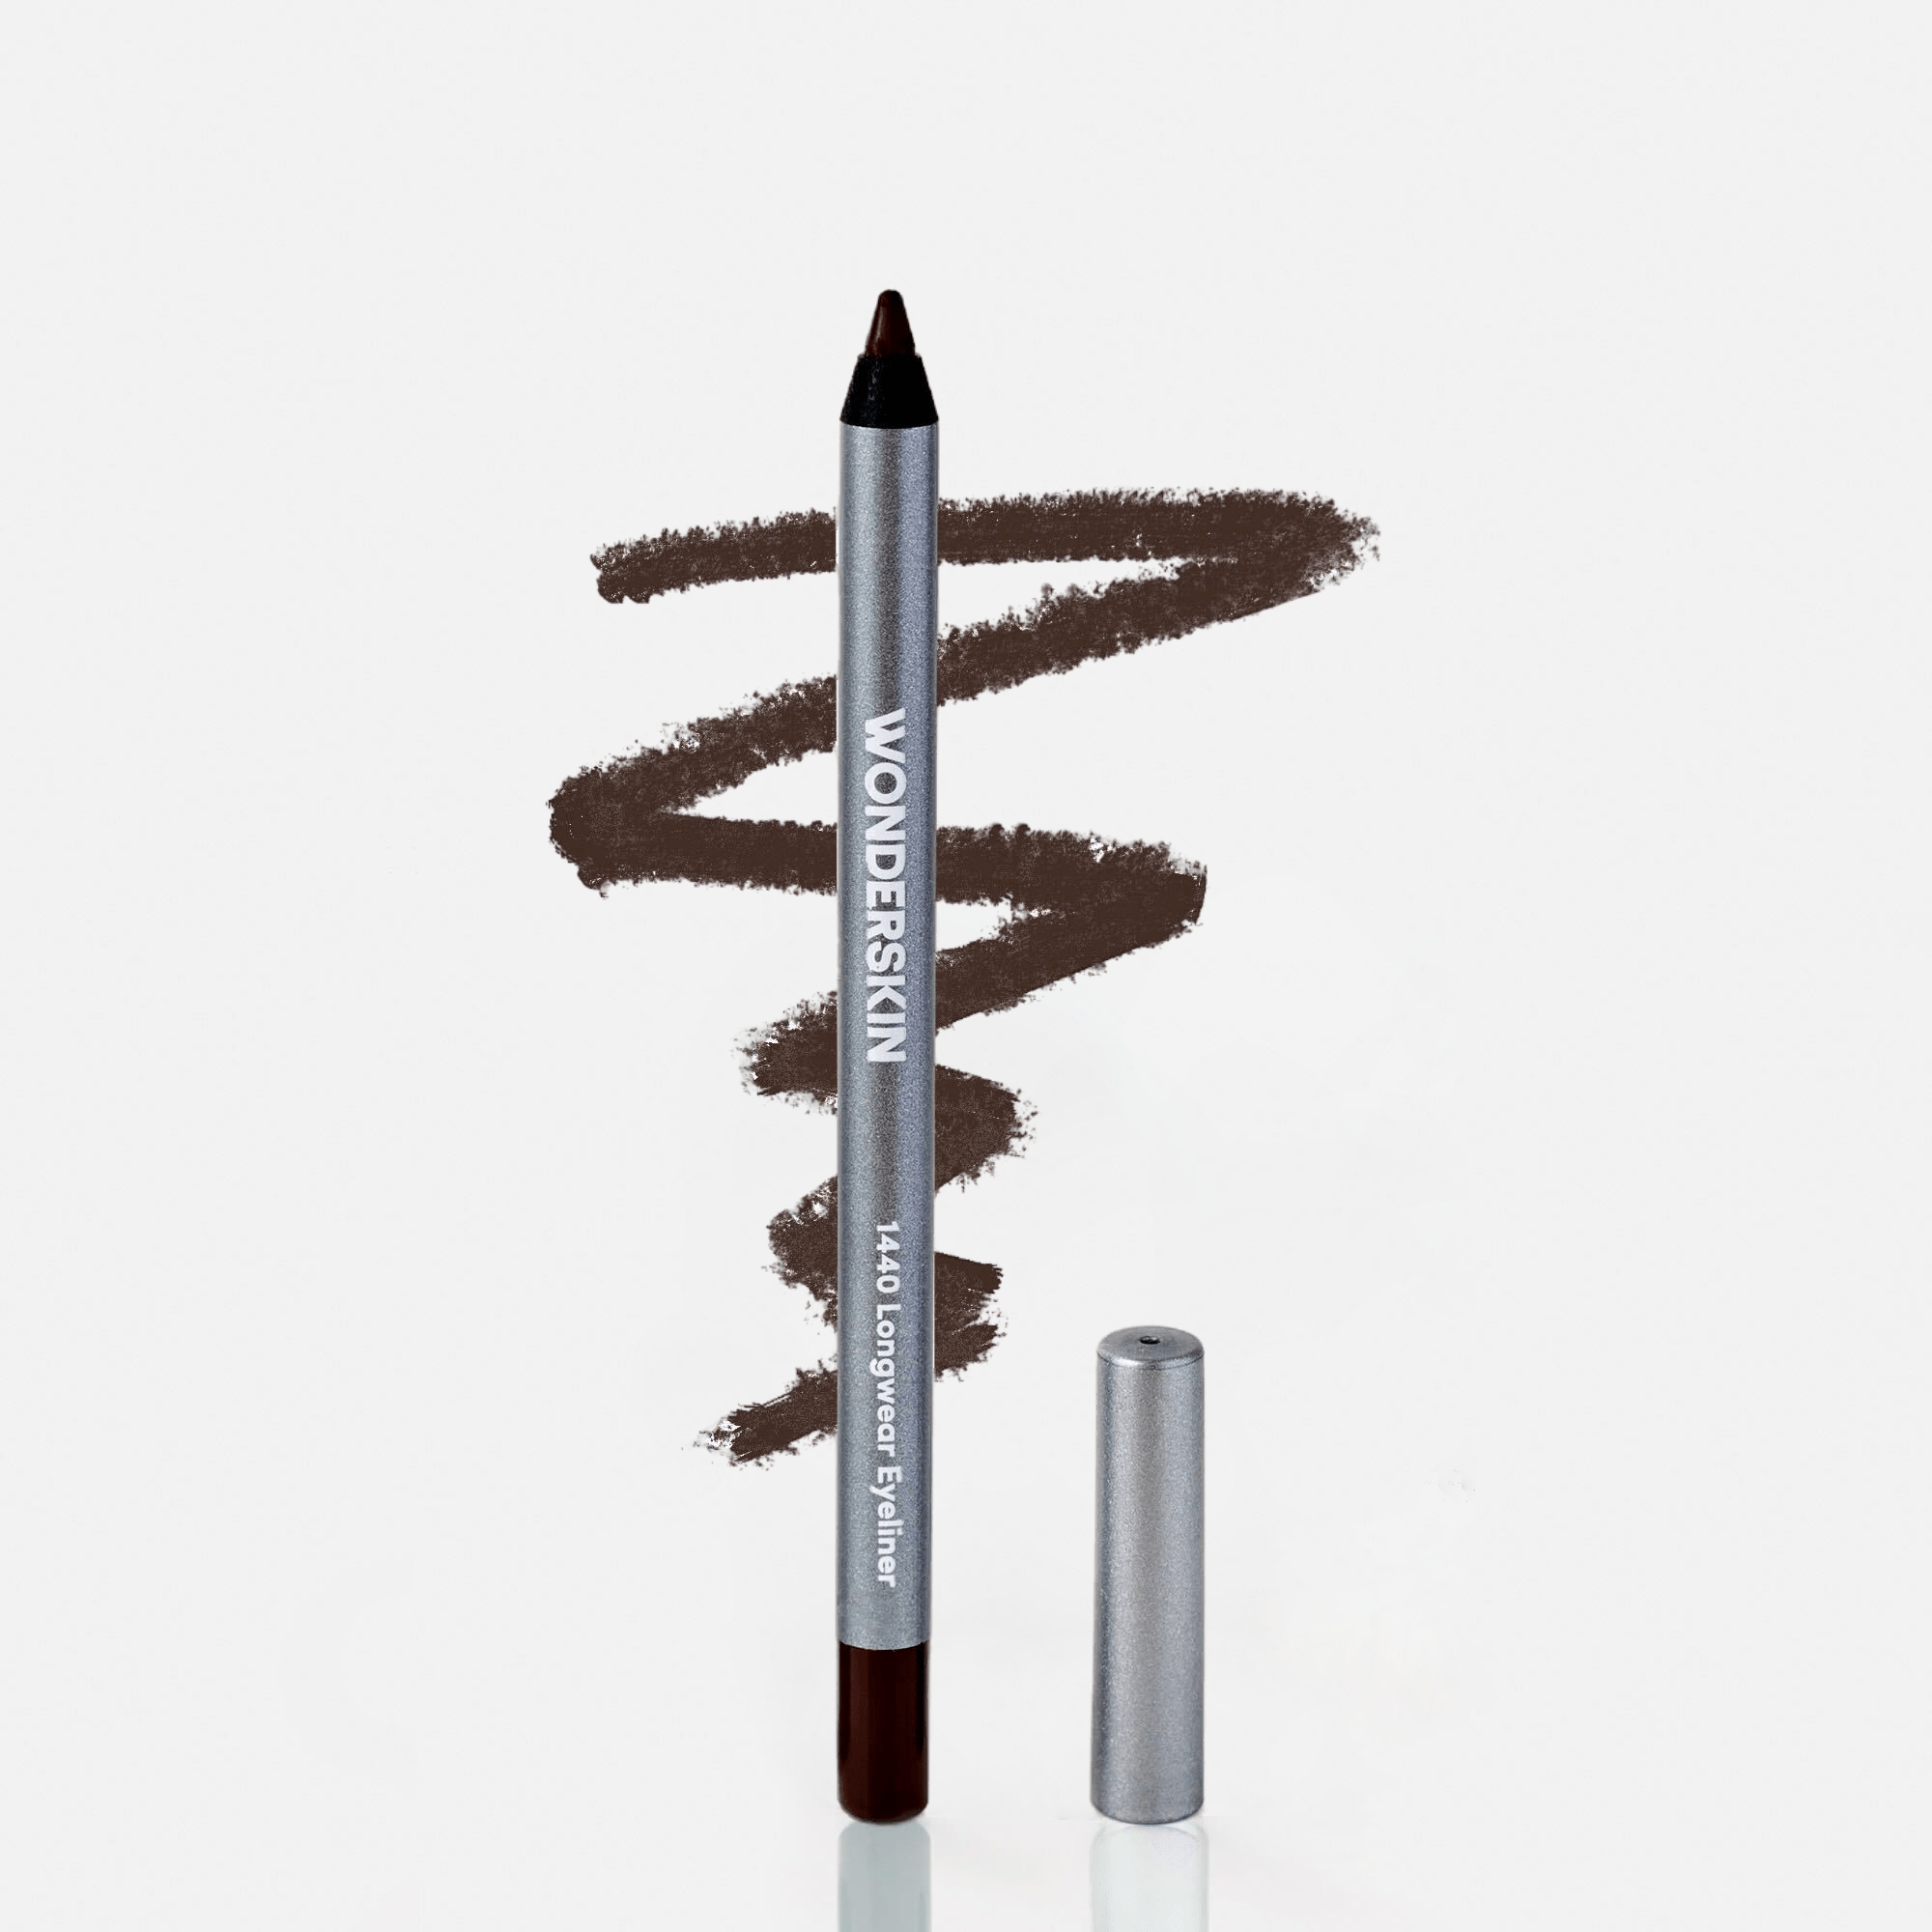 Chanel waterproof eyeliners. These are two beautiful blue toned shades